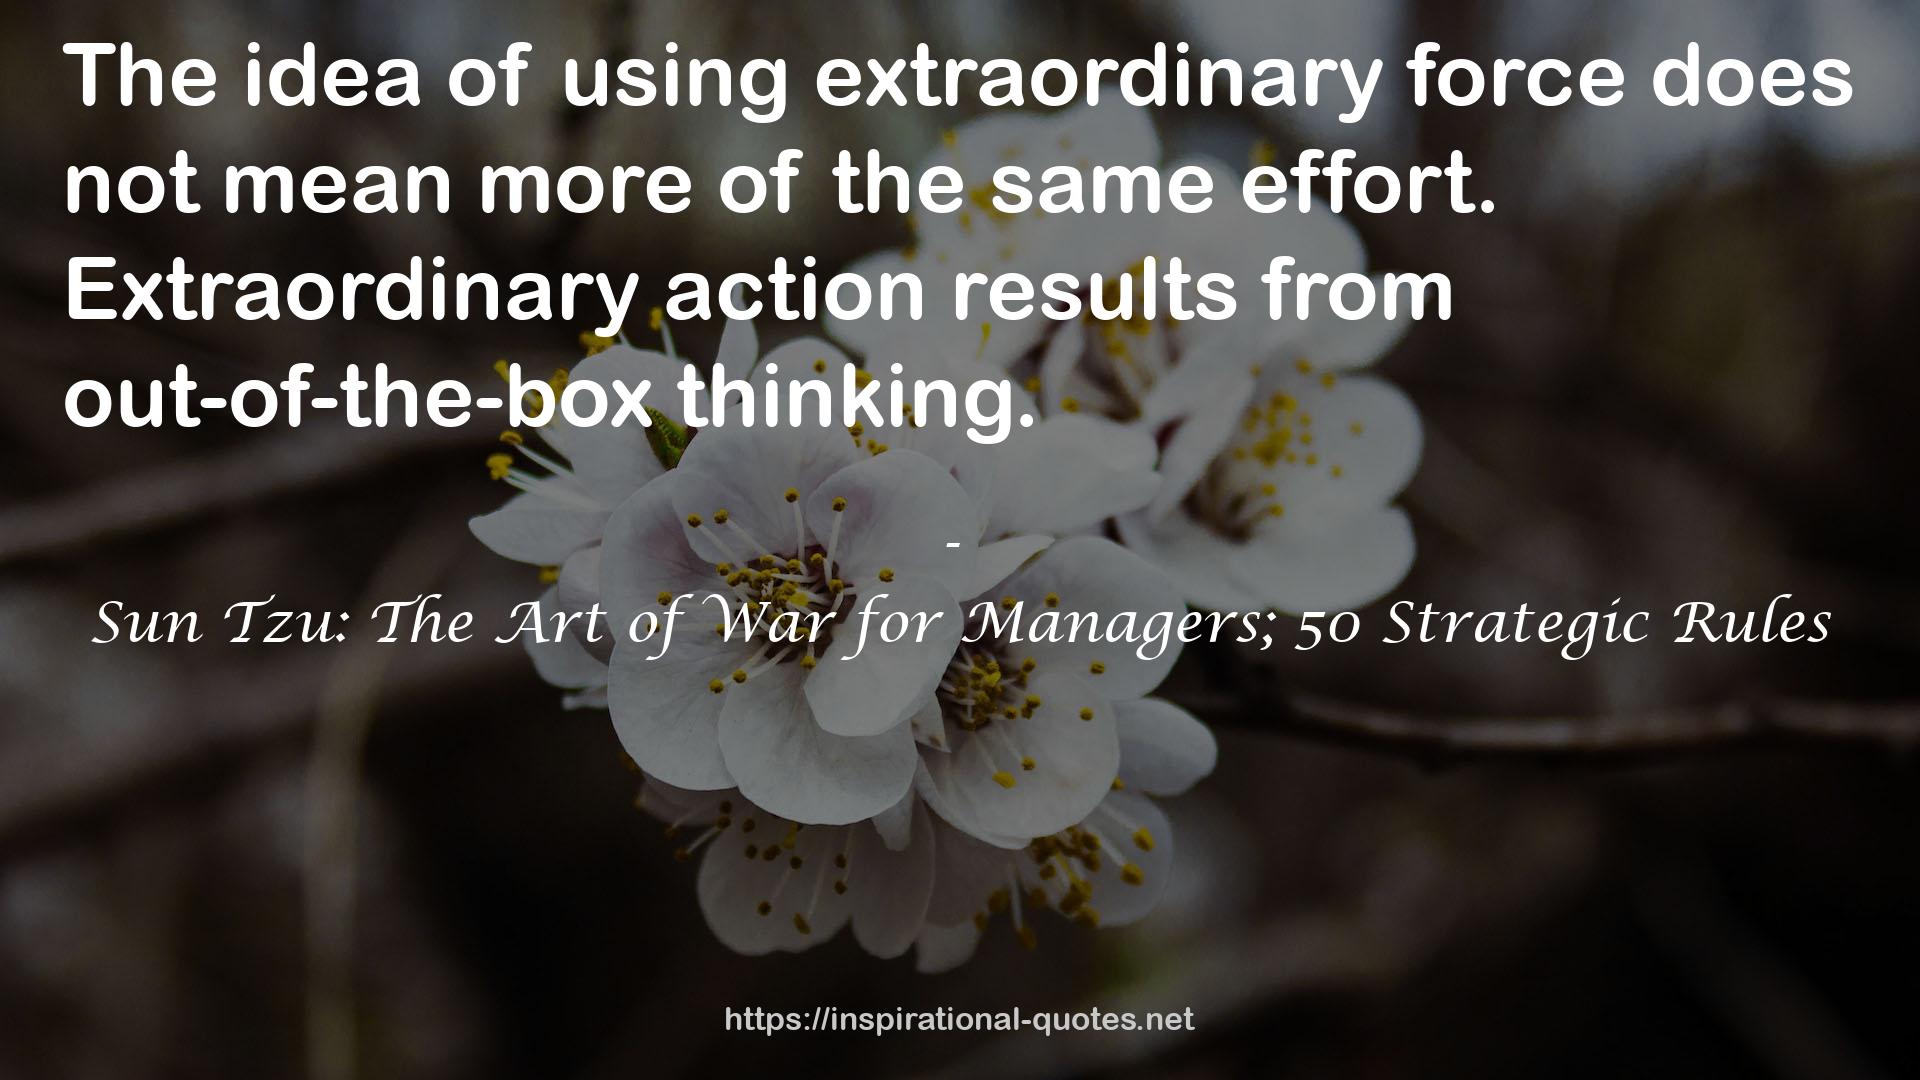 Sun Tzu: The Art of War for Managers; 50 Strategic Rules QUOTES